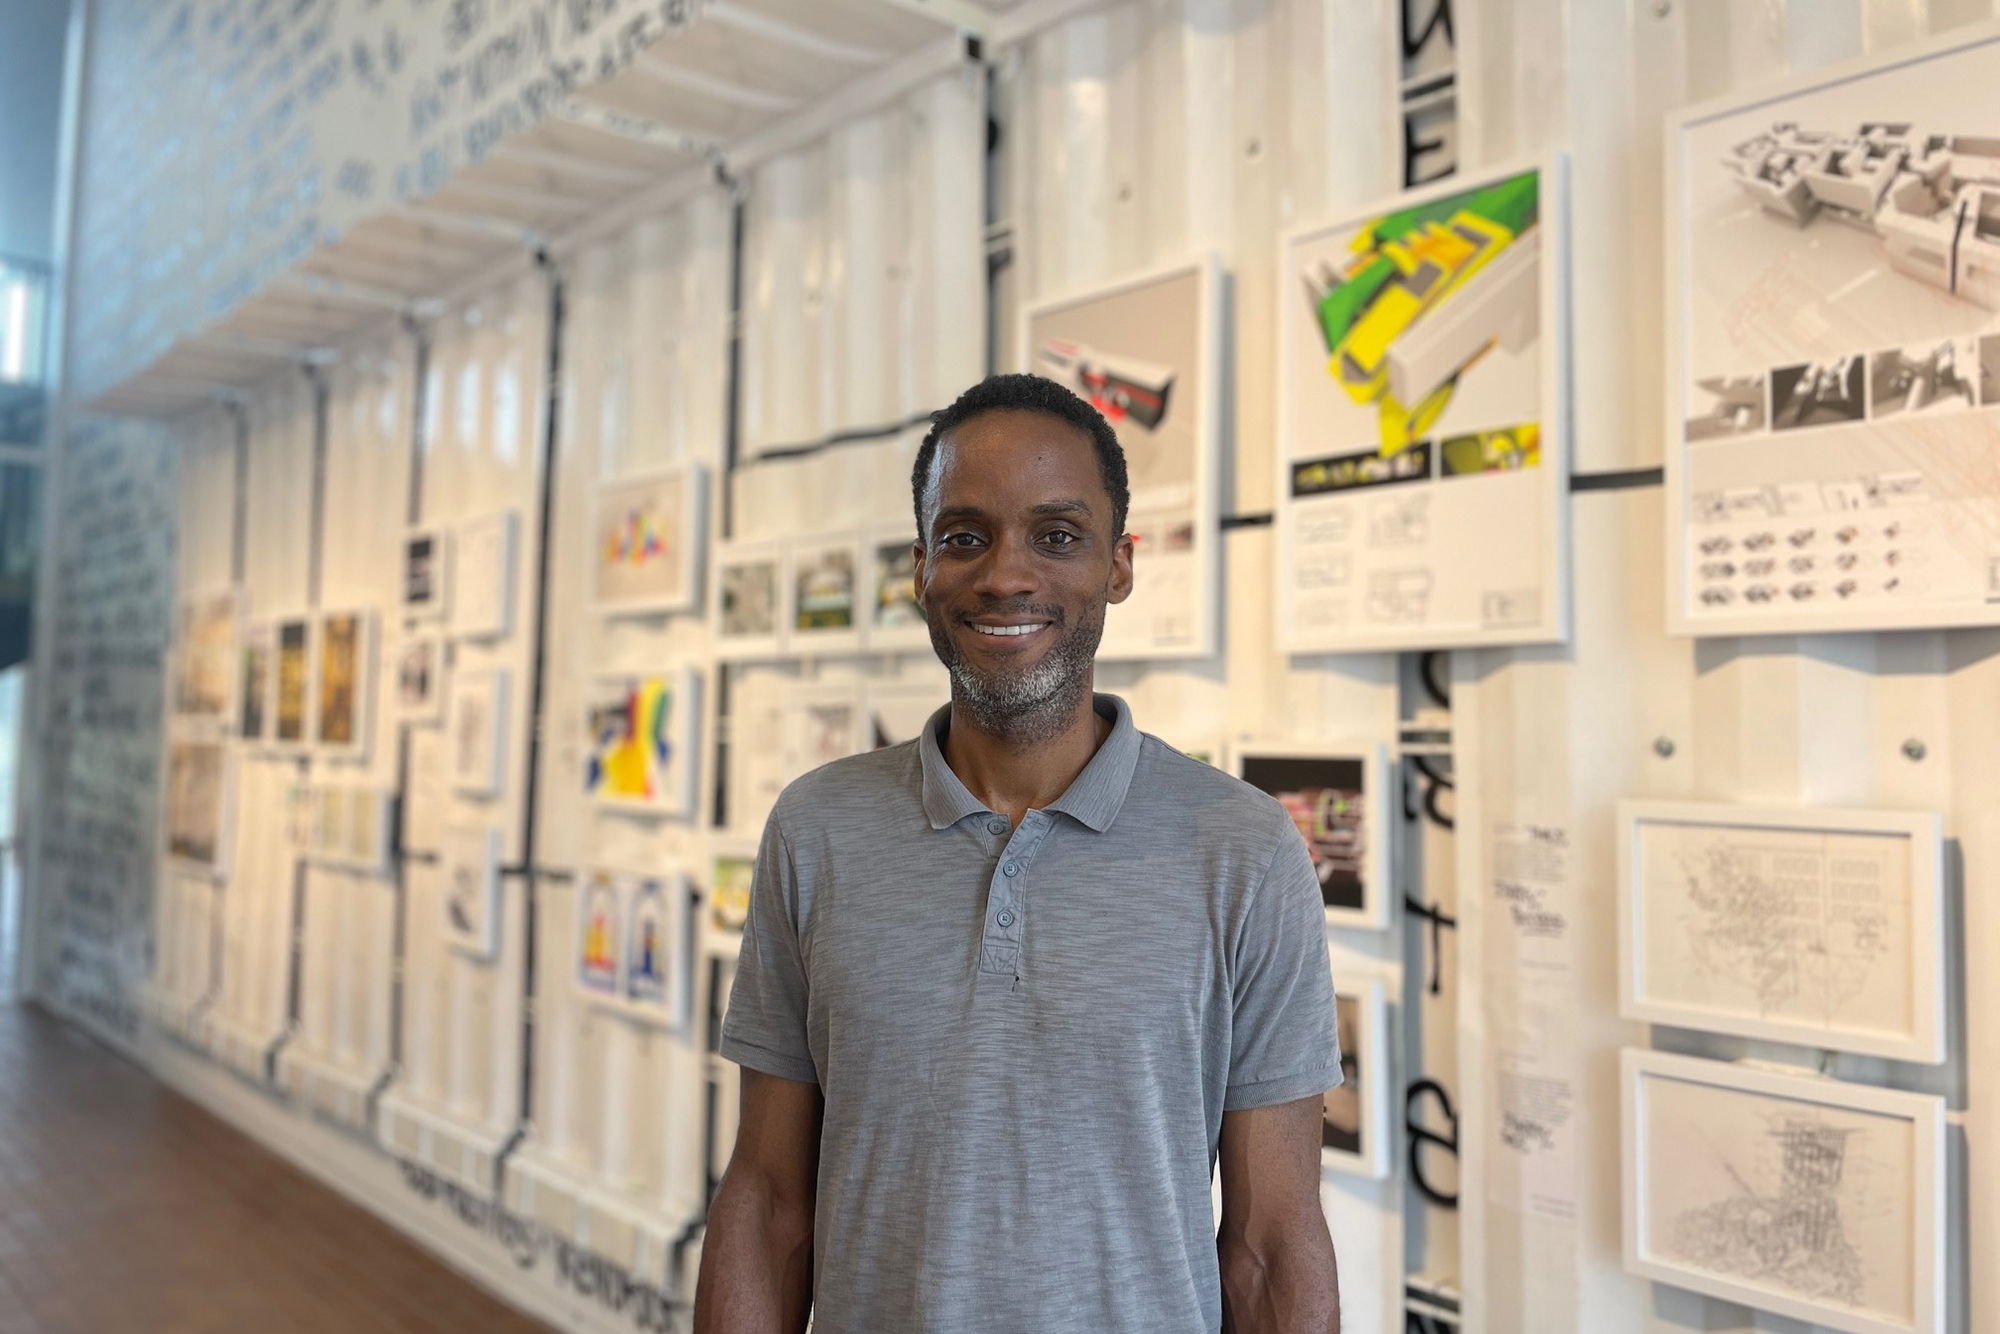 Sekou Cooke in the Projective Eye Gallery with Hip-Hop Architecture exhibition